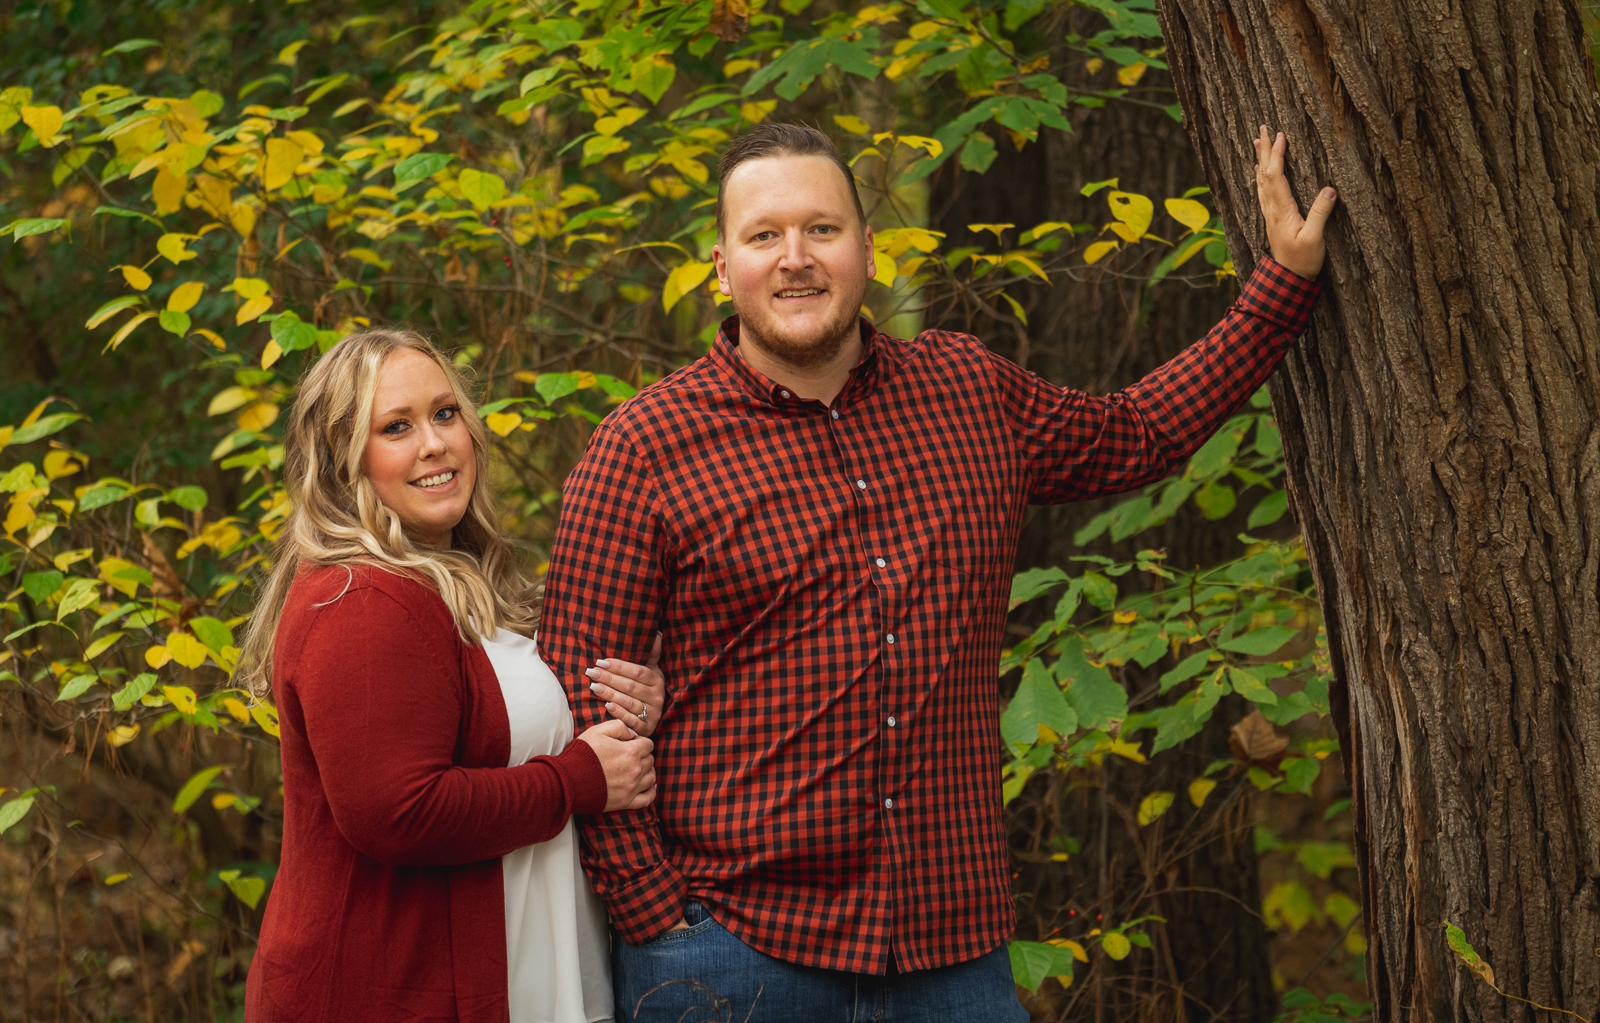 Man and woman fiancee engagement photo, outdoor fall engagement photo session at Everett Road Covered Bridge